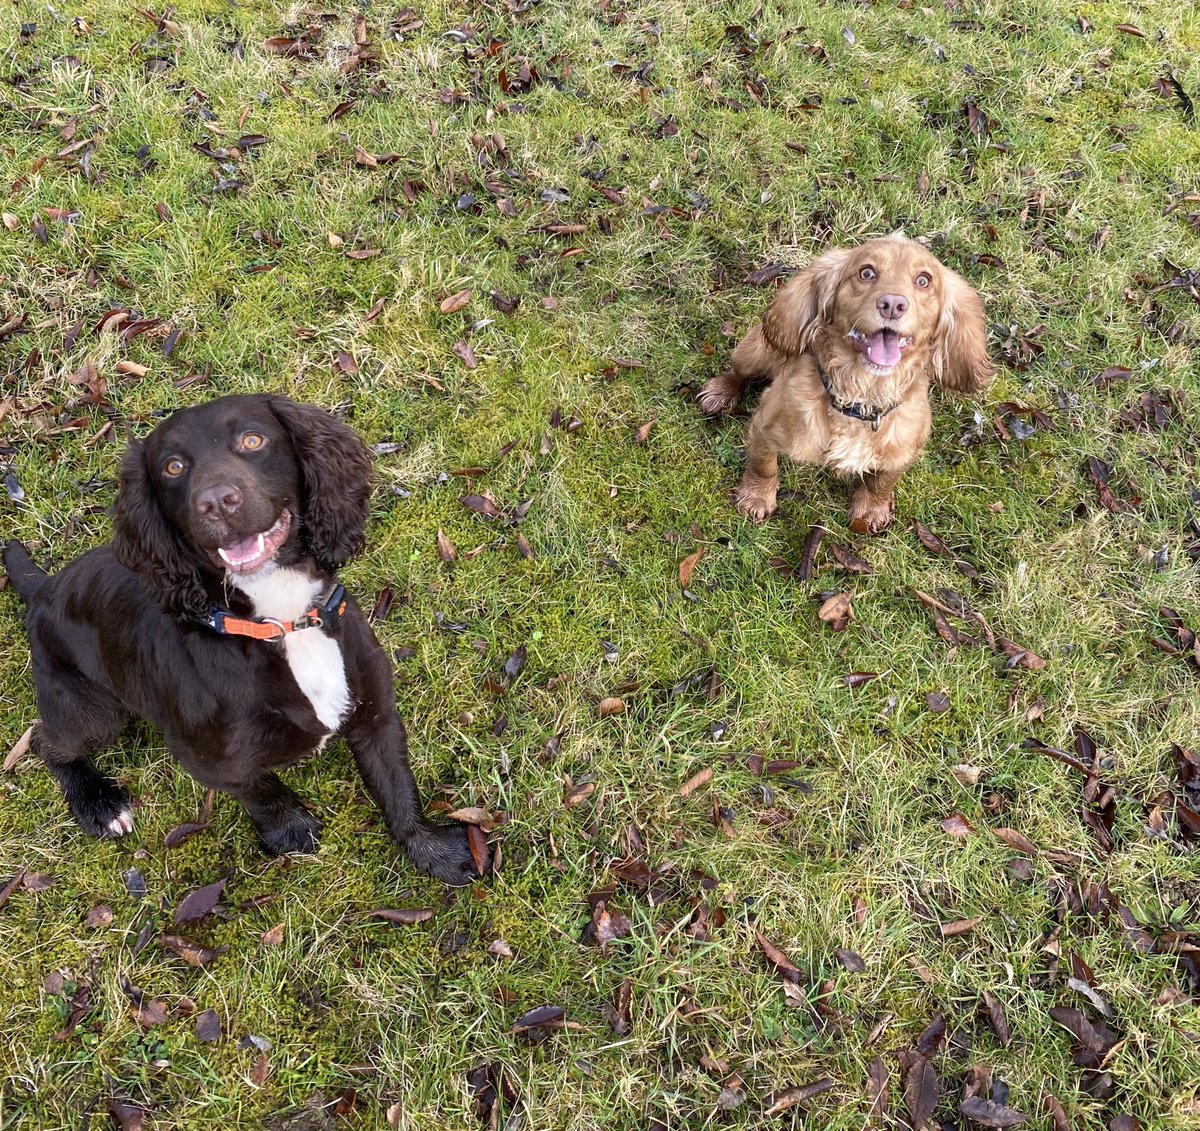 PD Socks met his little sister T/PD Rosie today. She is going to be handled by one of our instructors and will be trained as a digital media search dog #searchdogs #madspaniels